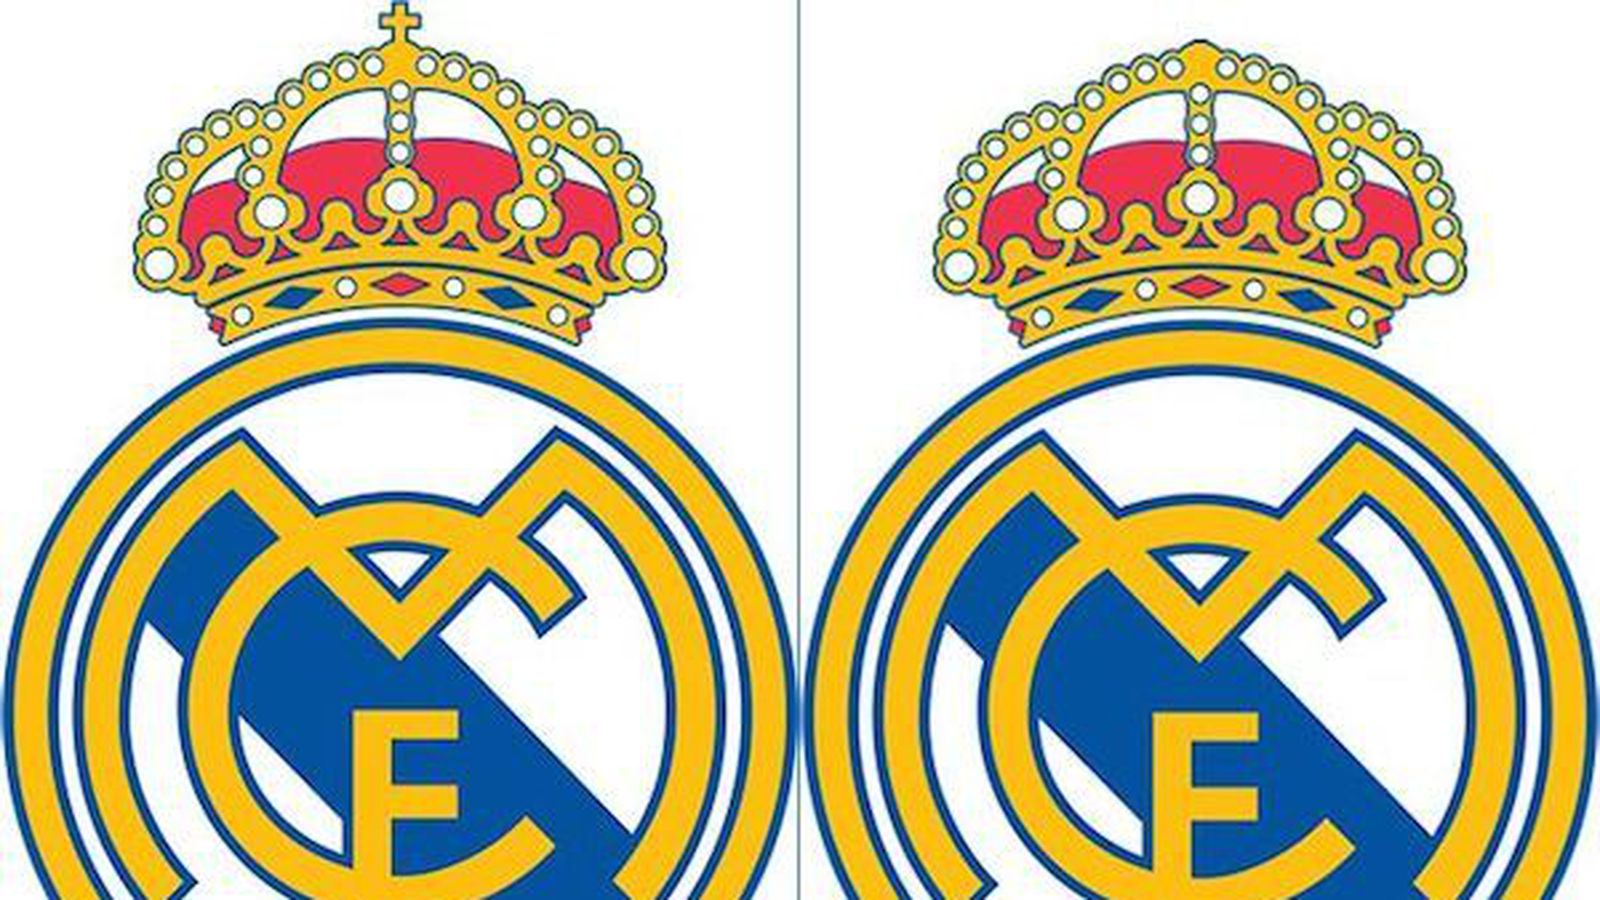 Real Madrid has an alternate crest without a cross for sponsorship